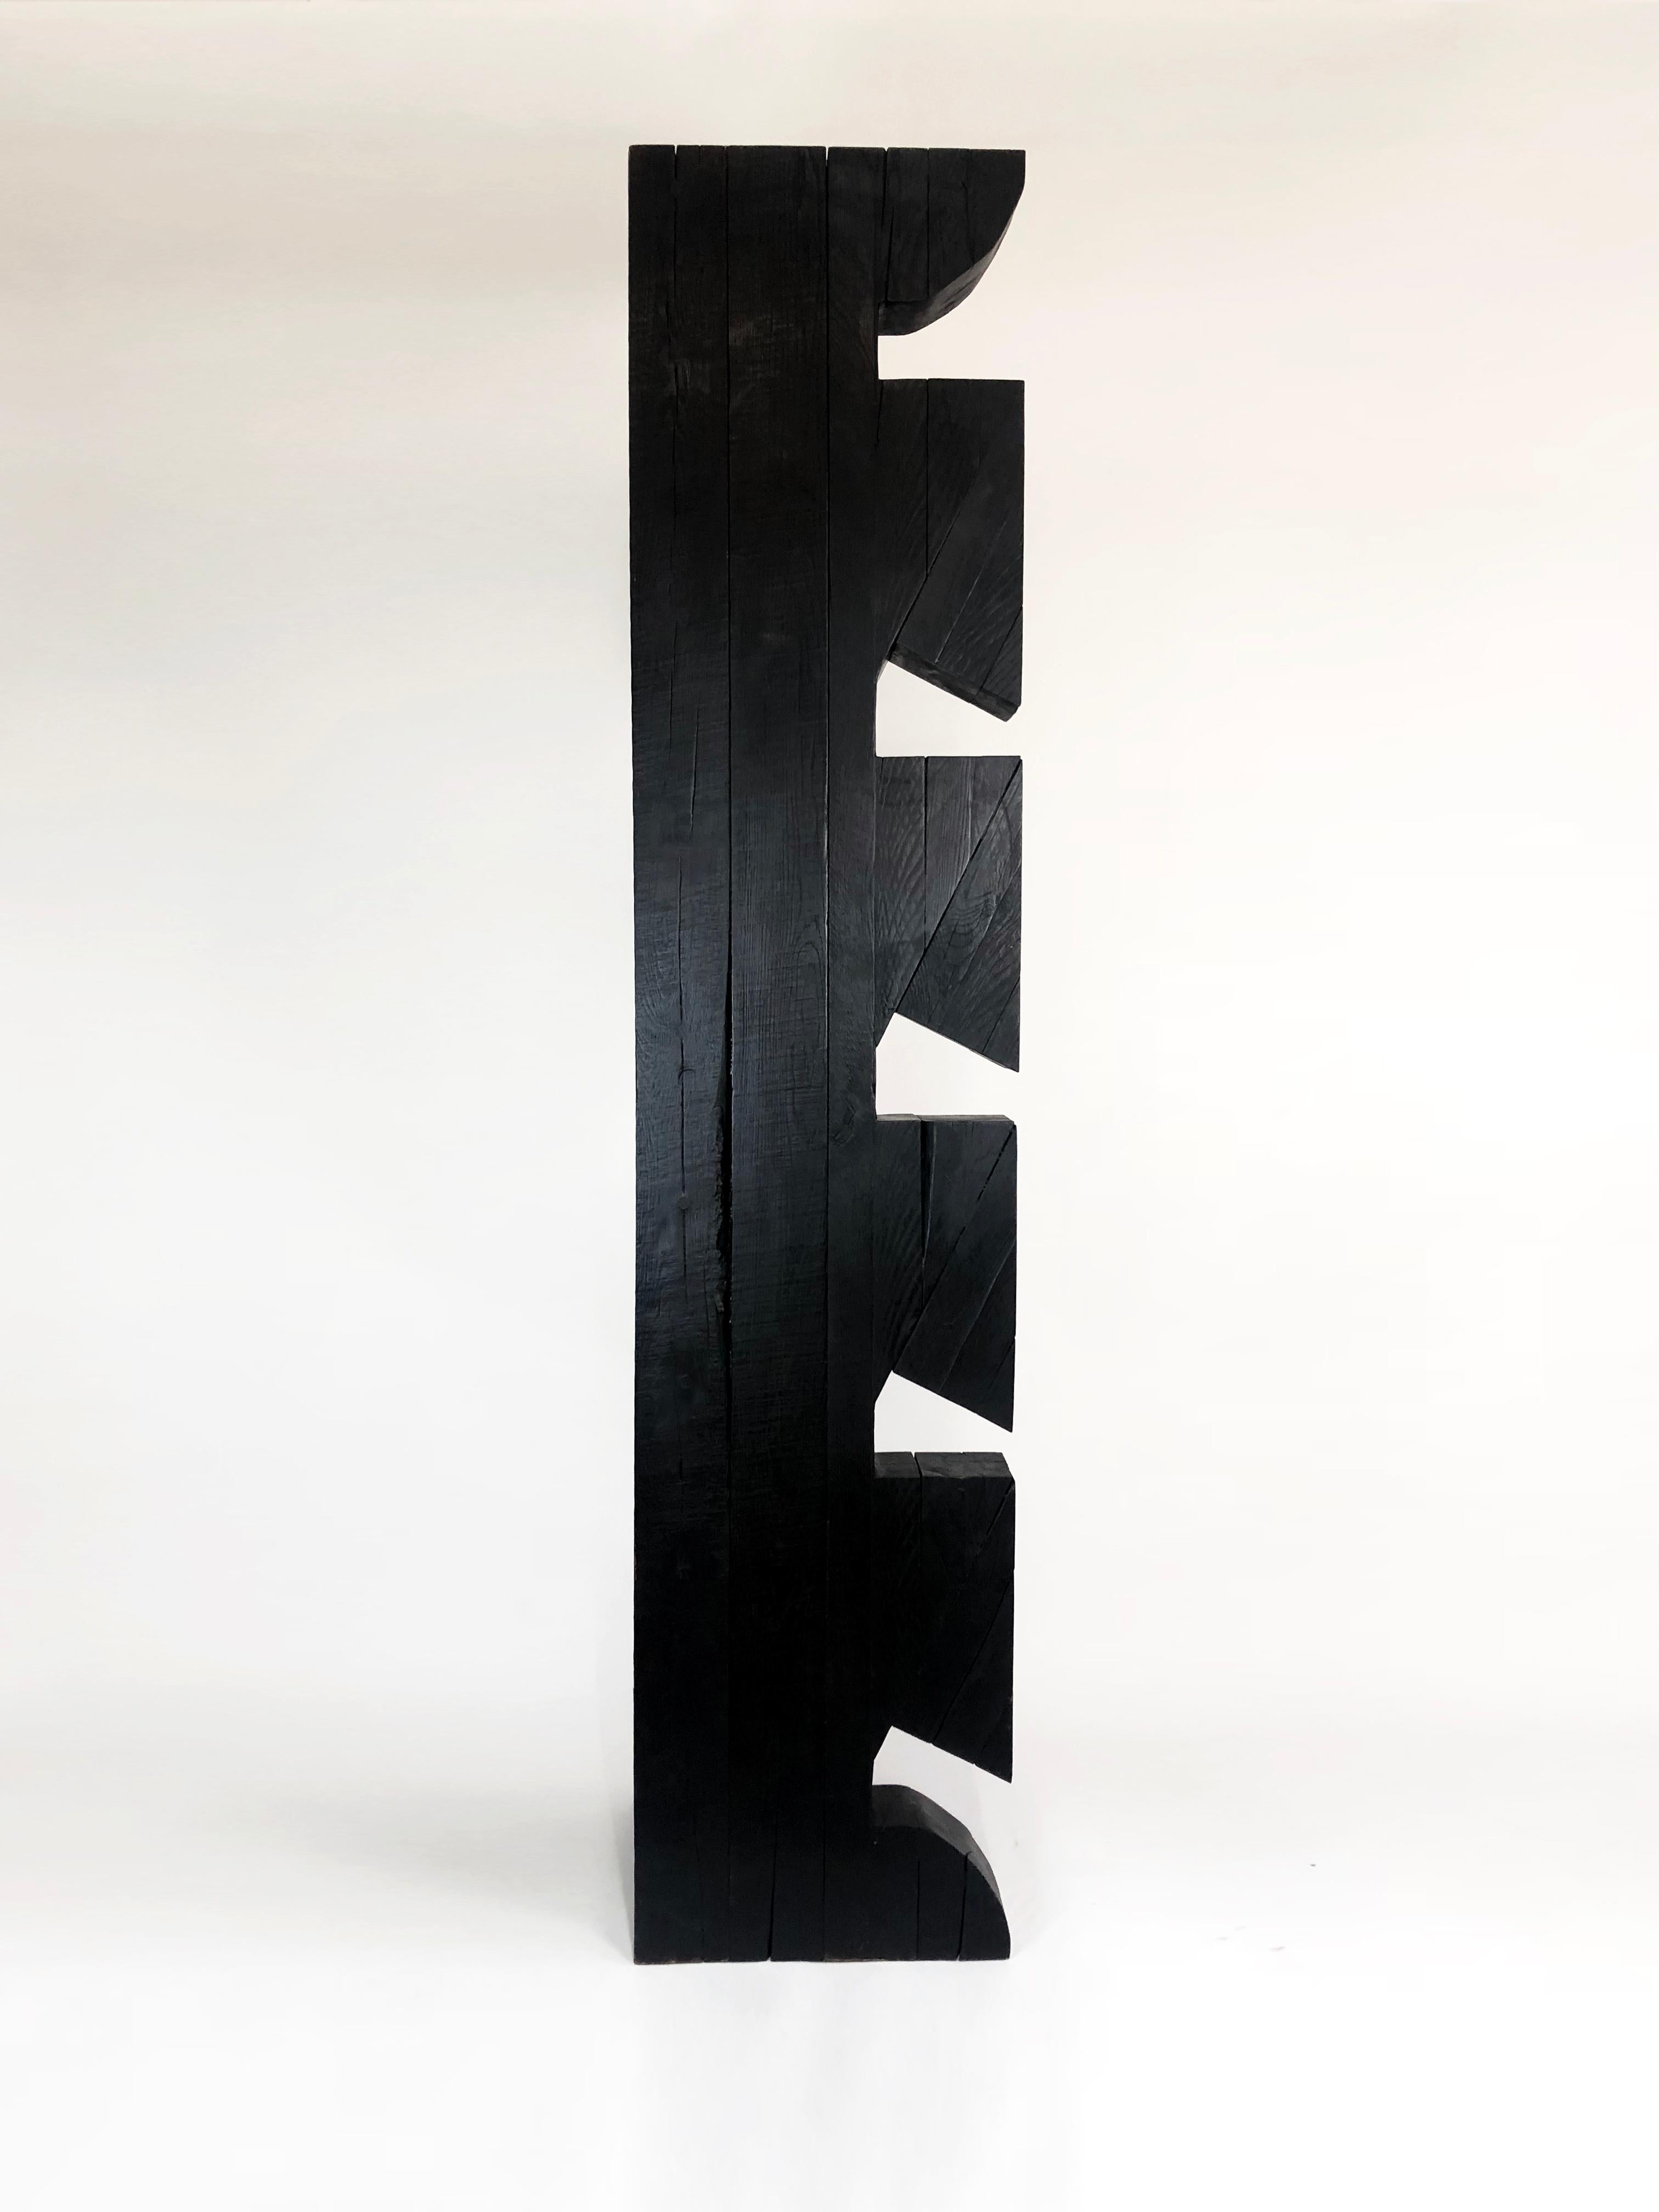 Torr III - Brown Abstract Sculpture by Bask